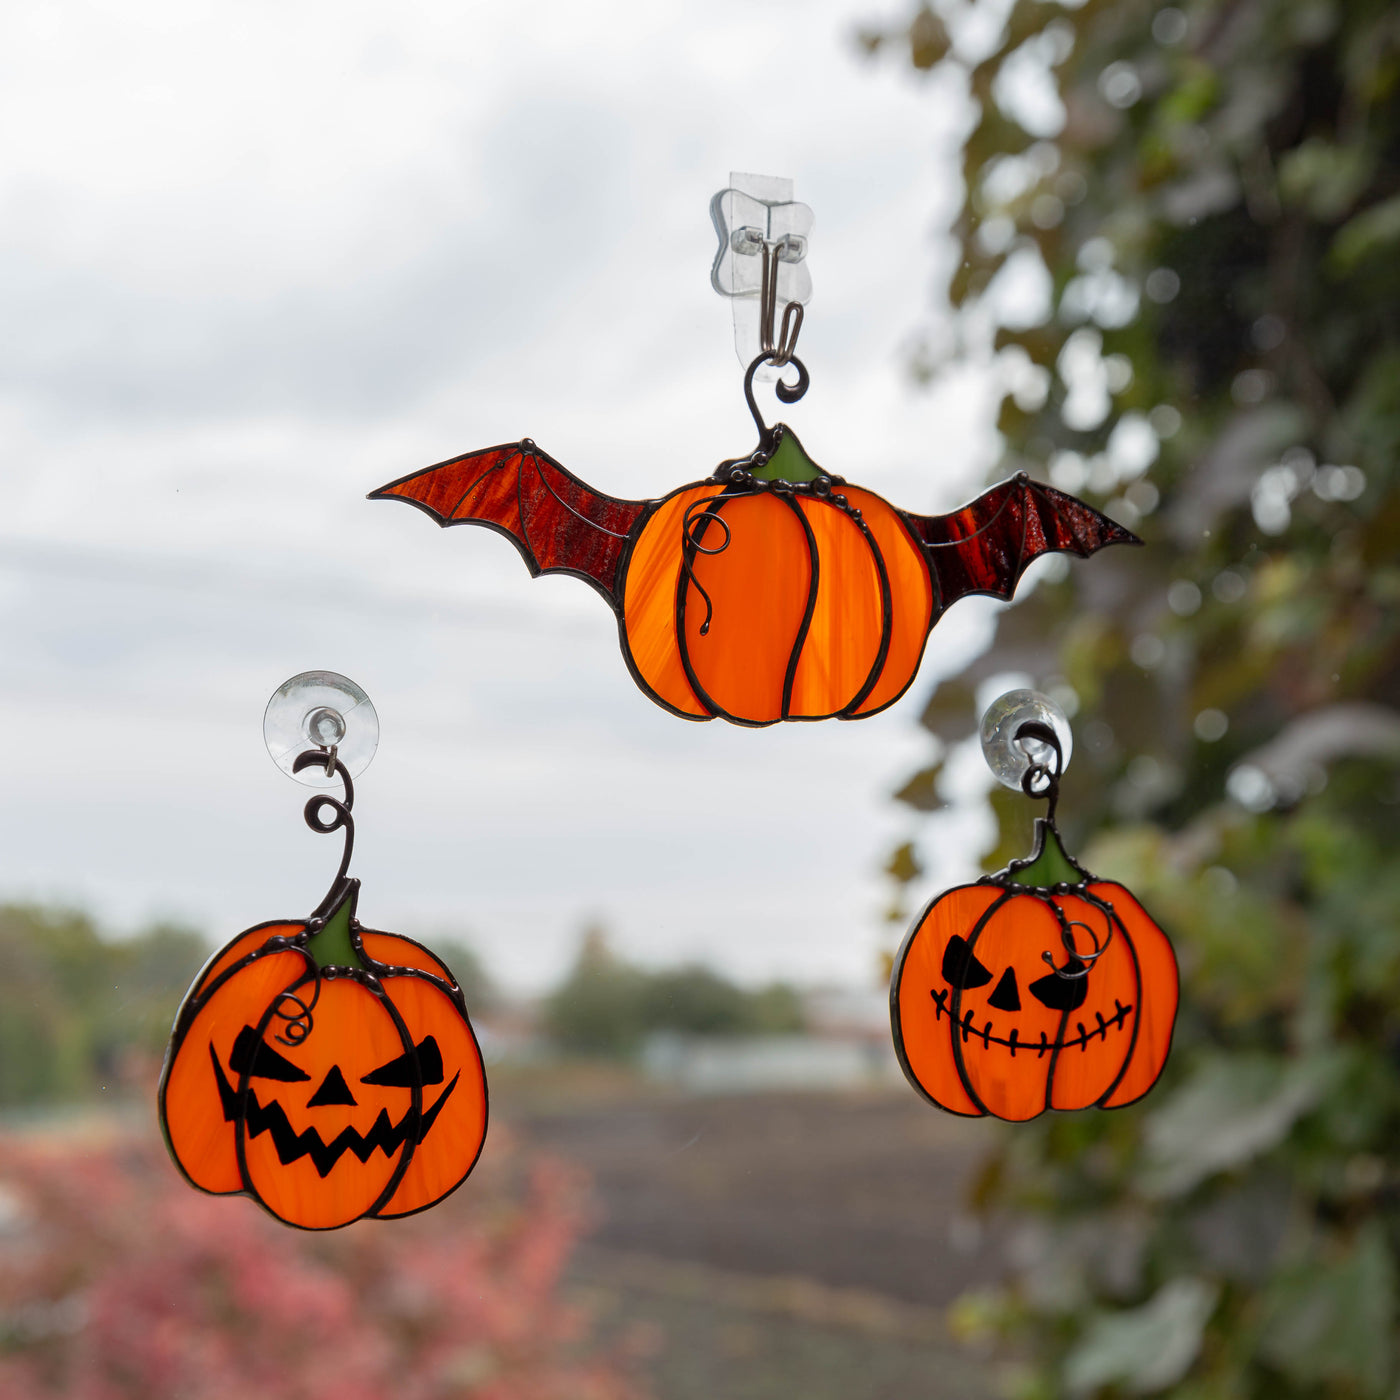 Stained glass suncatchers of two orange curved pumpkins and a flying one